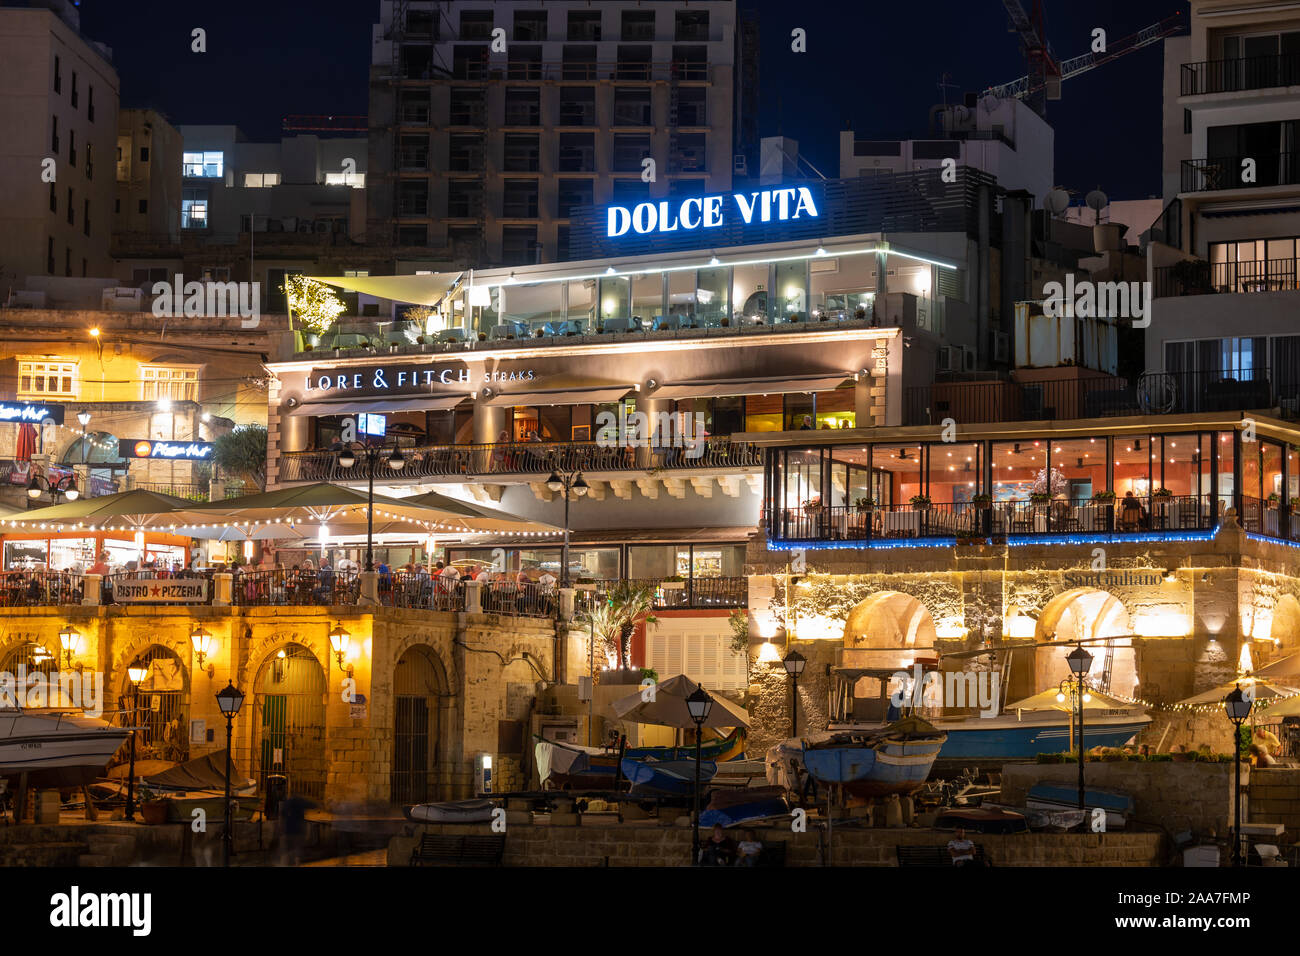 Paceville, St Julian, Malta - October 10, 2019: Restaurants Dolce Vita, Lore and Fitch and San Giuliano in Paceville, Saint Julian town at night Stock Photo